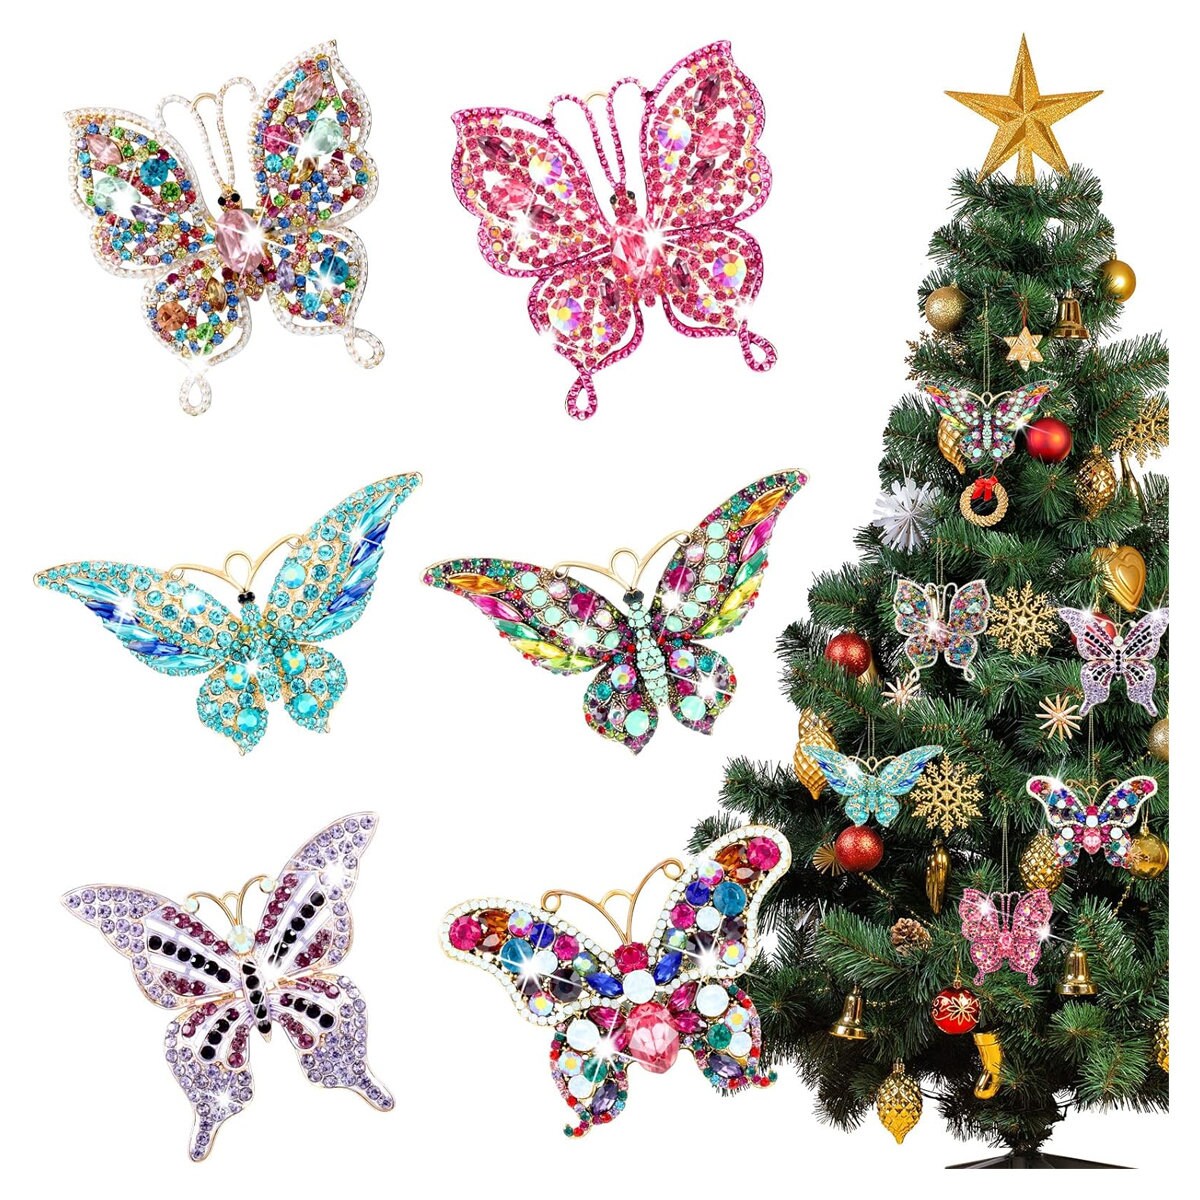 LIOOBO 20pcs Christmas Ornament Butterfly Wall Stickers Christmas Glitter  Butterflies Glitter Ornaments for Christmas Tree Christmas Tree Ornaments